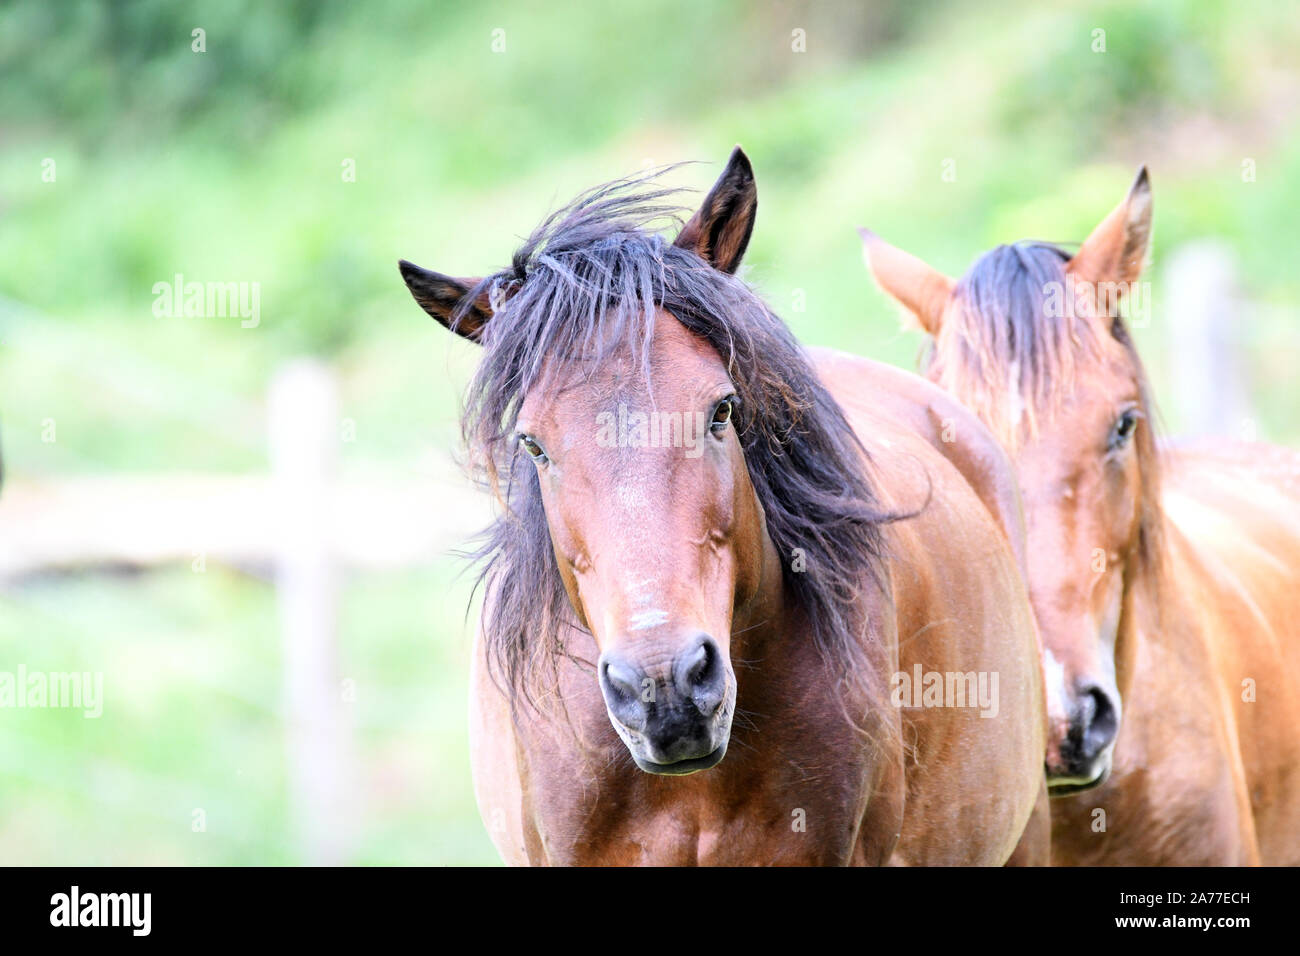 Two beautiful brown horses in a close up view Stock Photo